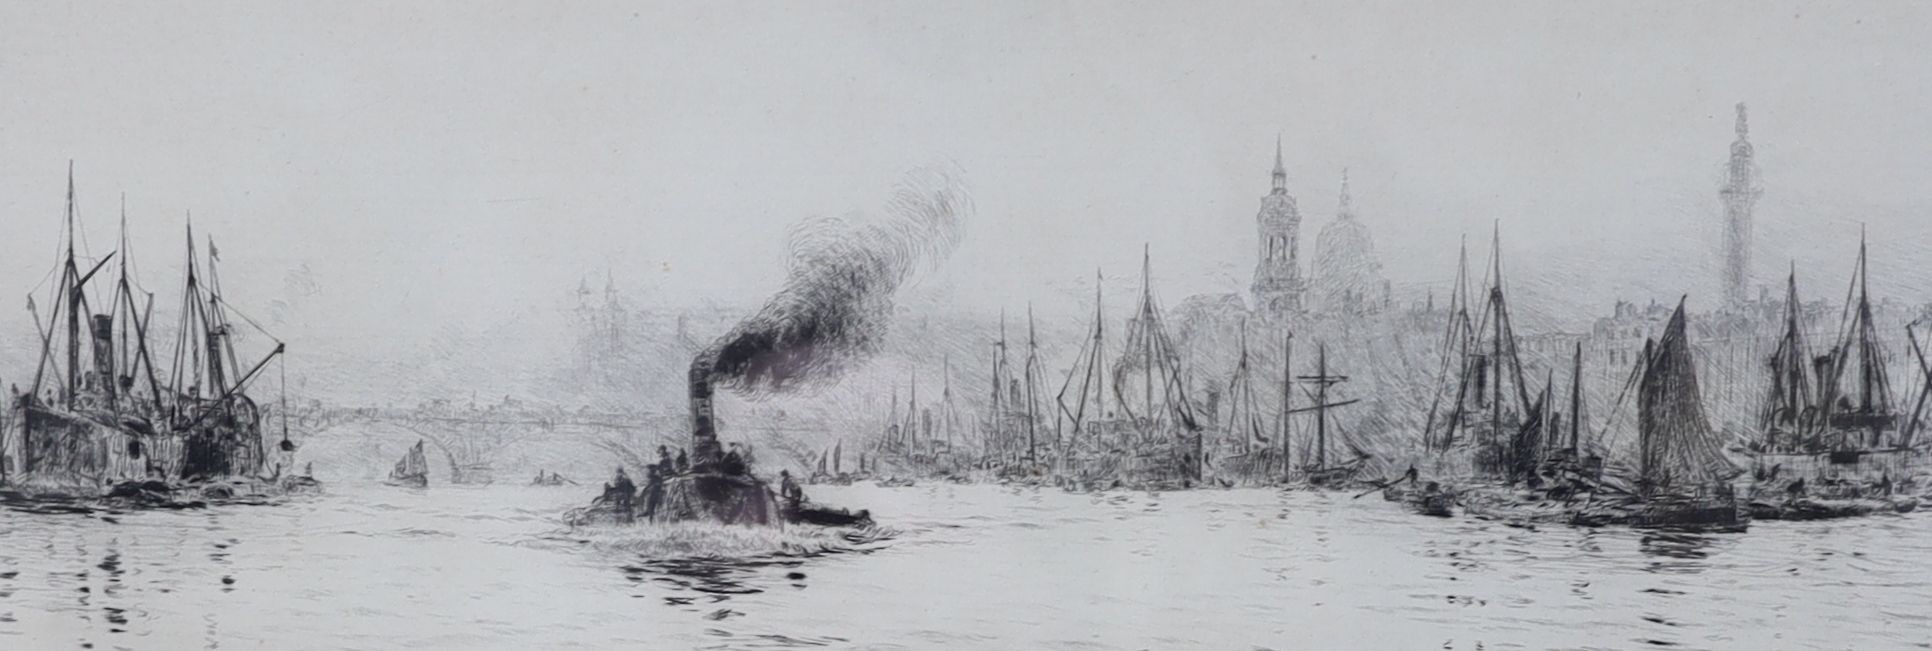 William Lionel Wyllie (1851-1931), etching, View along The Thames, signed in pencil, 11 x 33cm